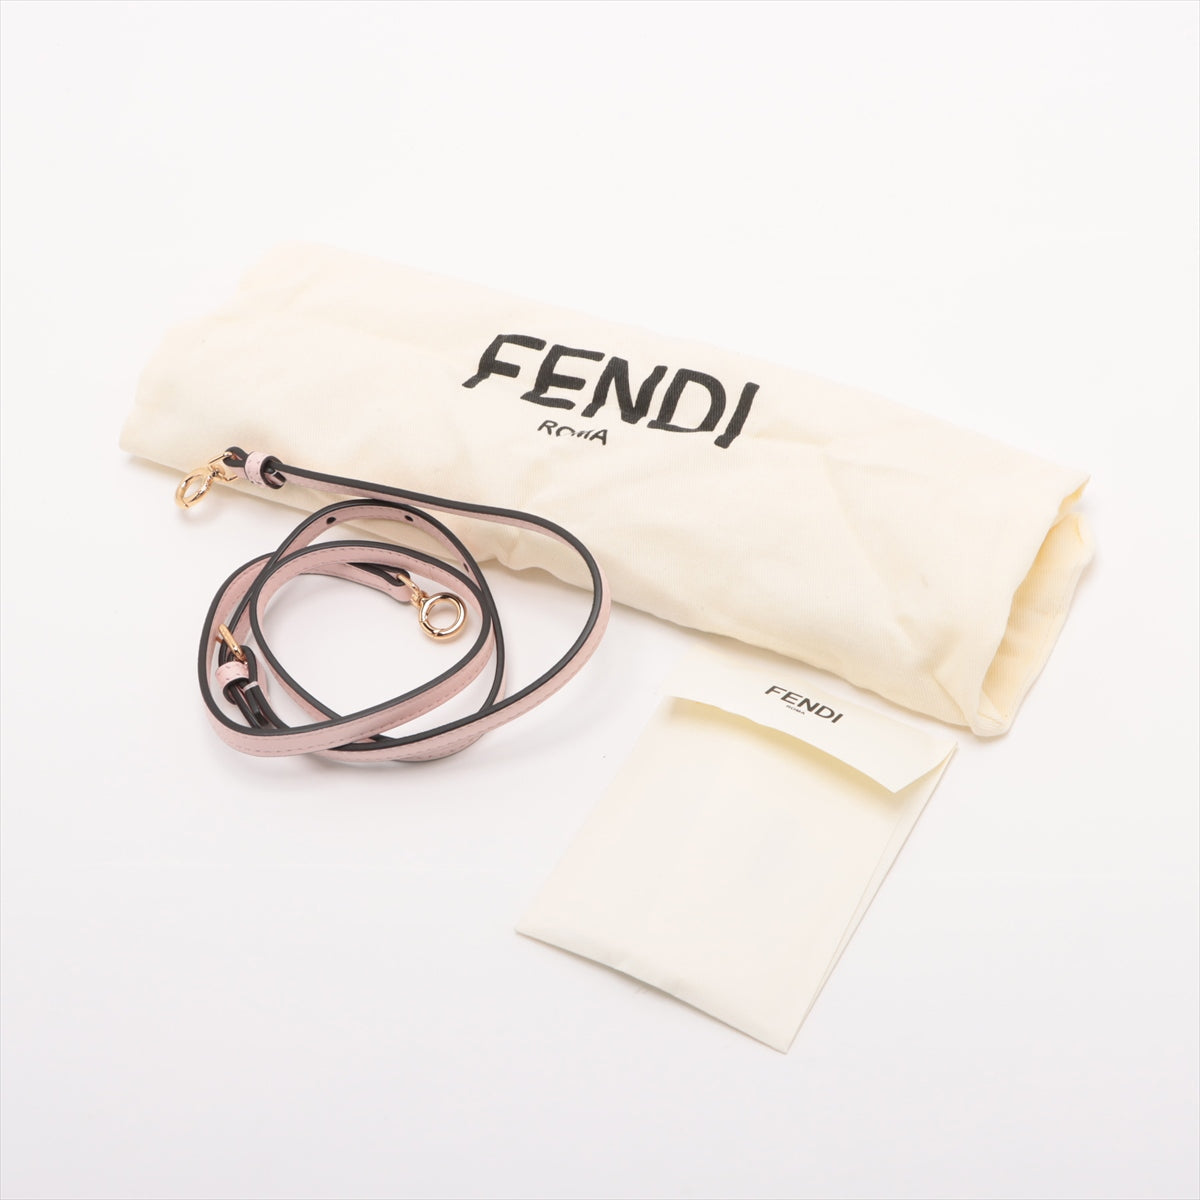 Fendi First Leather x Pearson Shoulder Bag Pink 8BP129